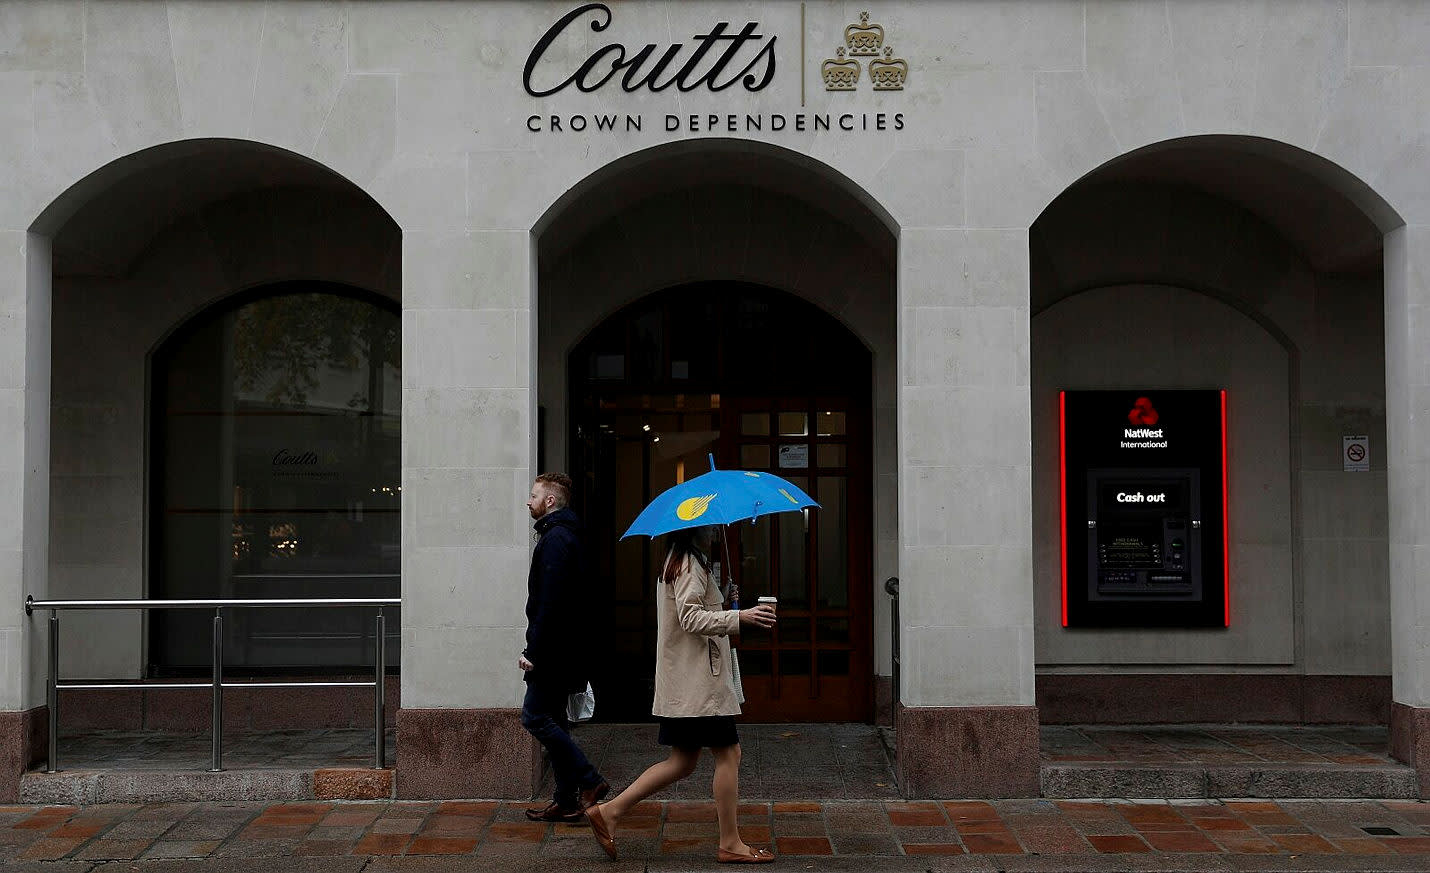 Coutts introduces mortgages to intermediary market